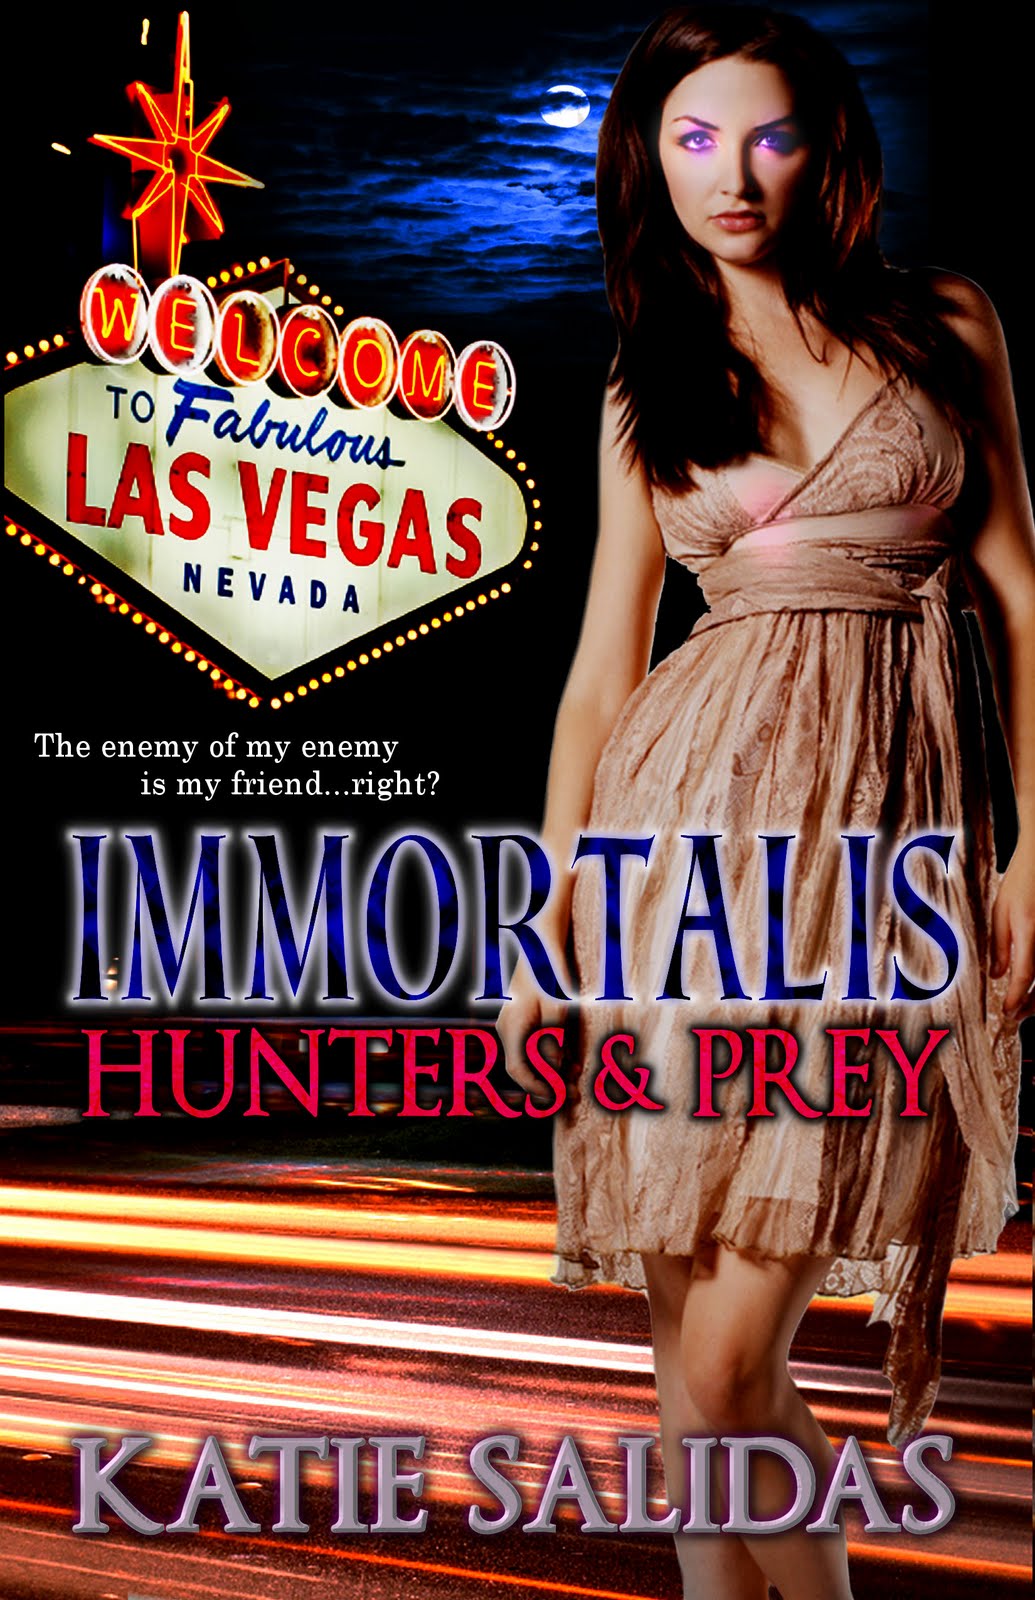 Immortalis Hunters And Prey By Katie Salidas Chapter One Excerpt